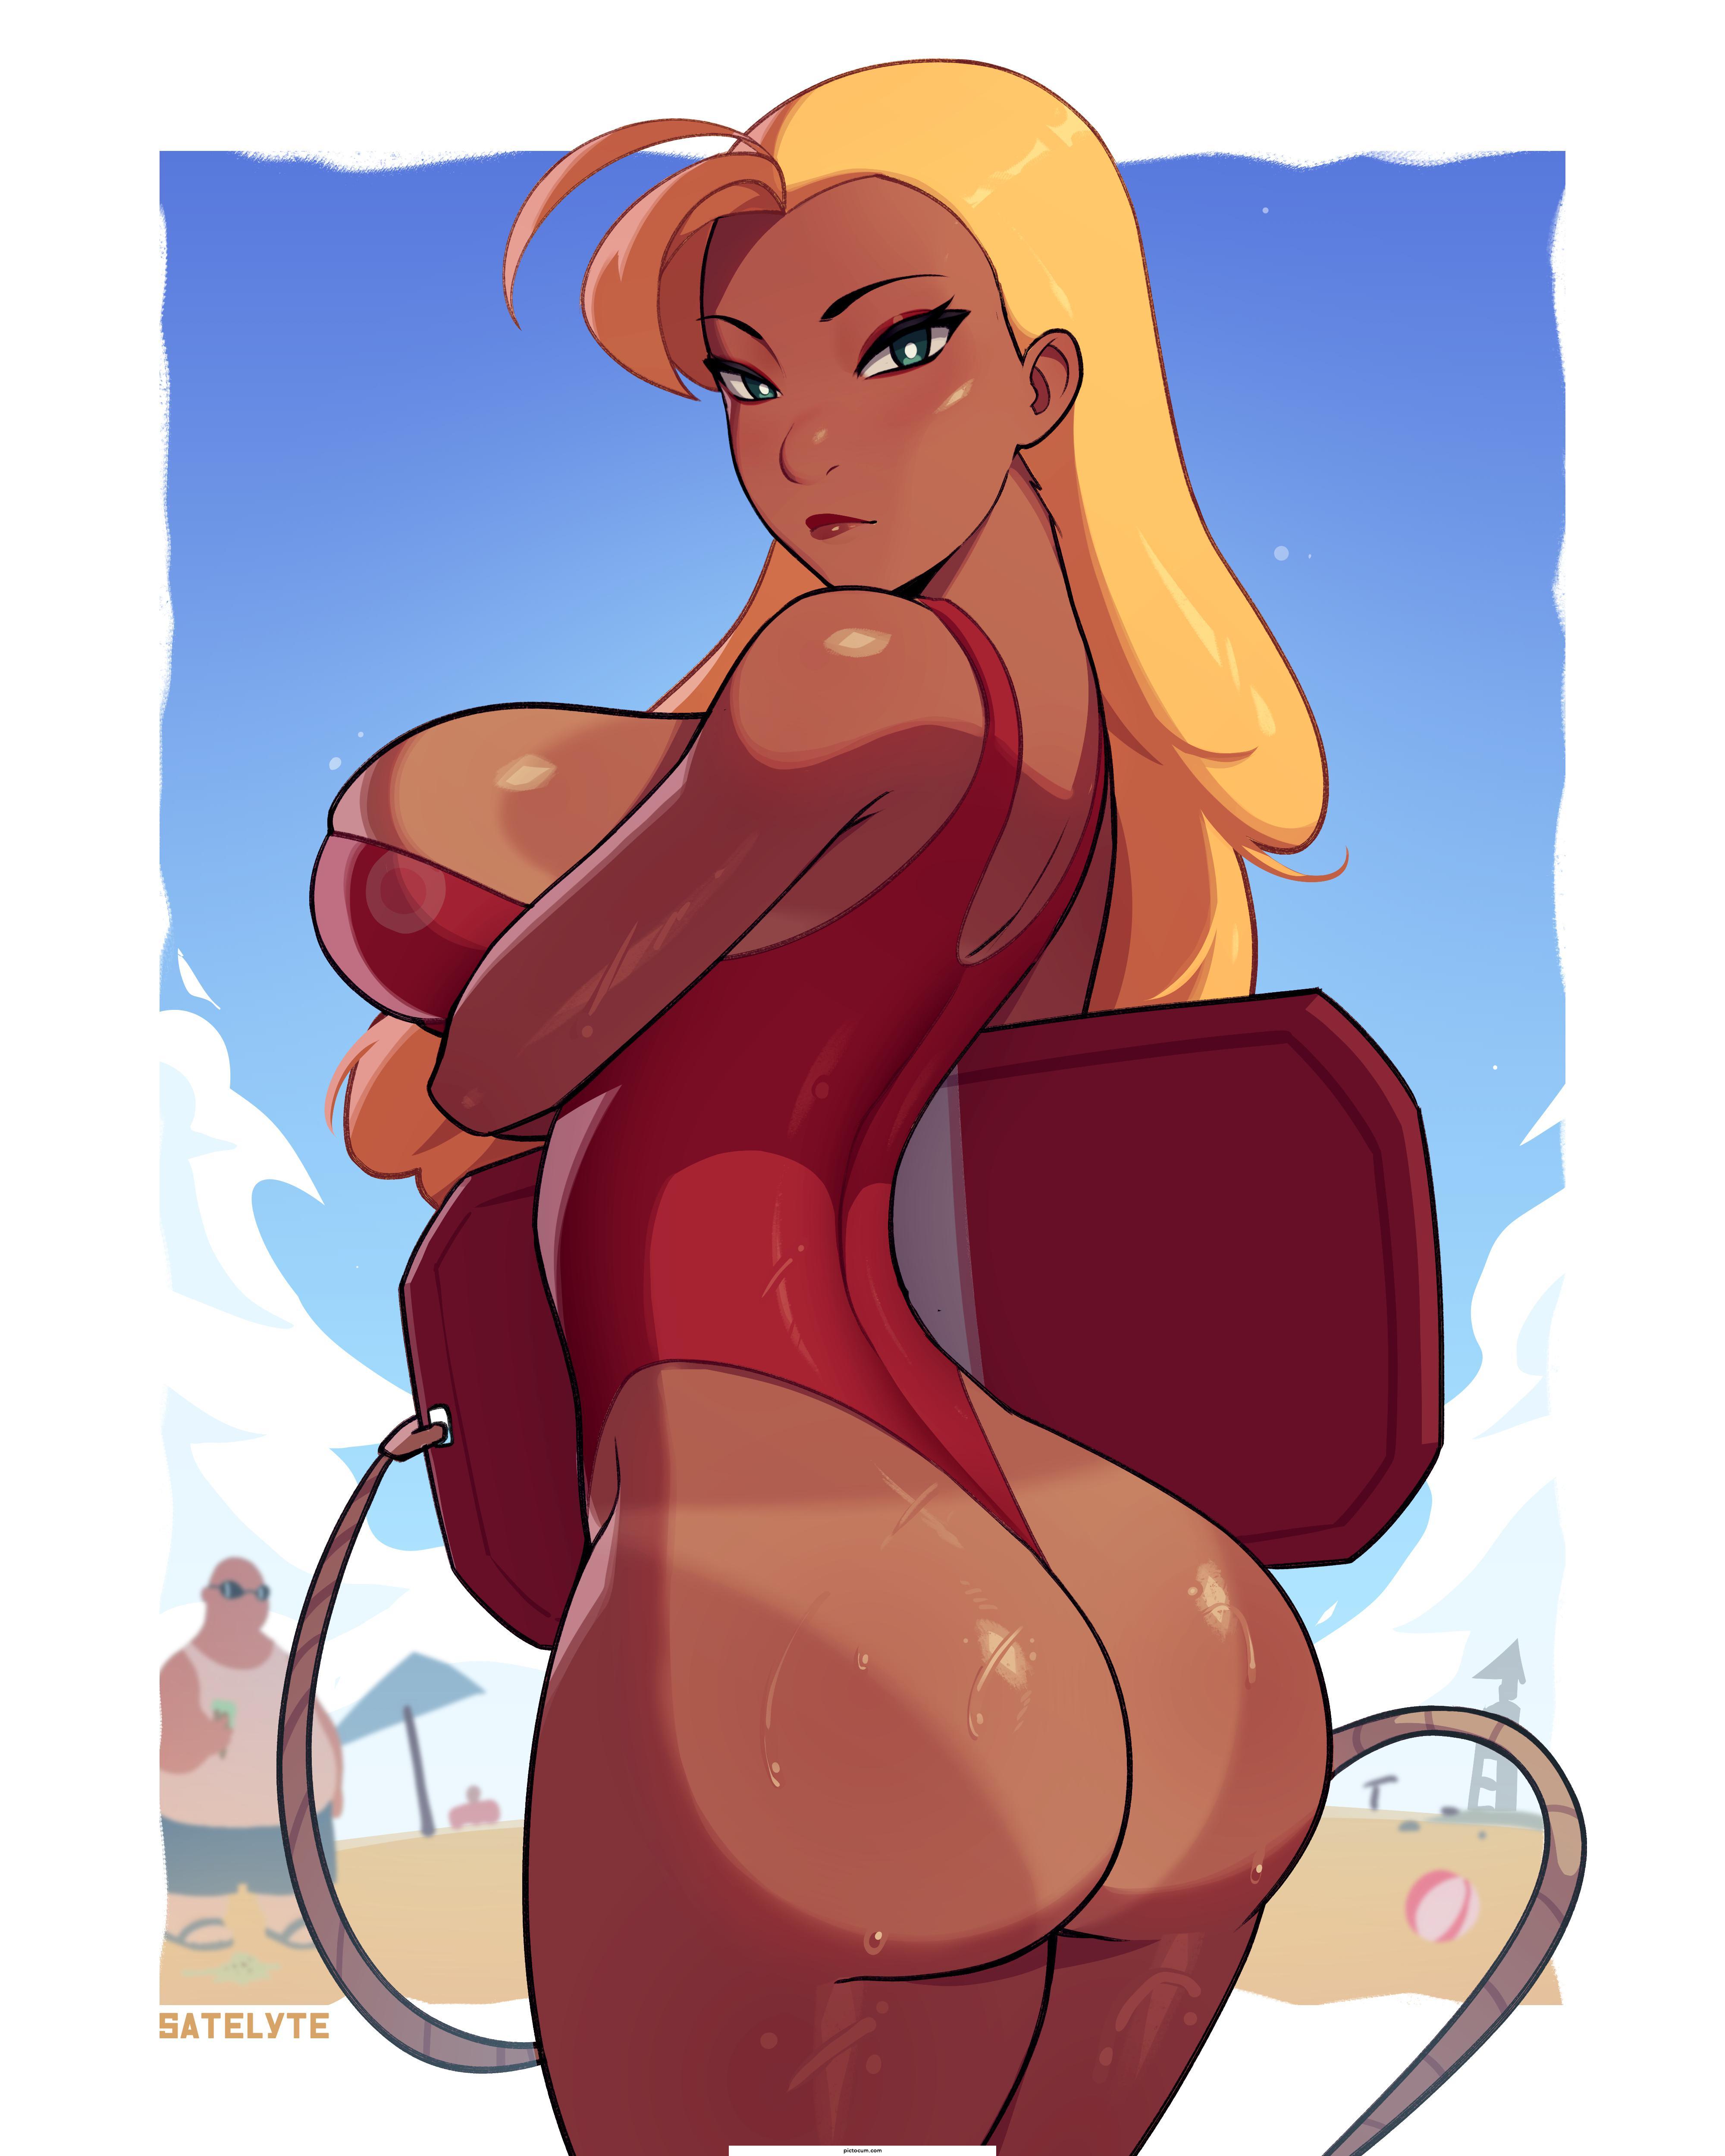 Lifeguard from Lilo and Stitch